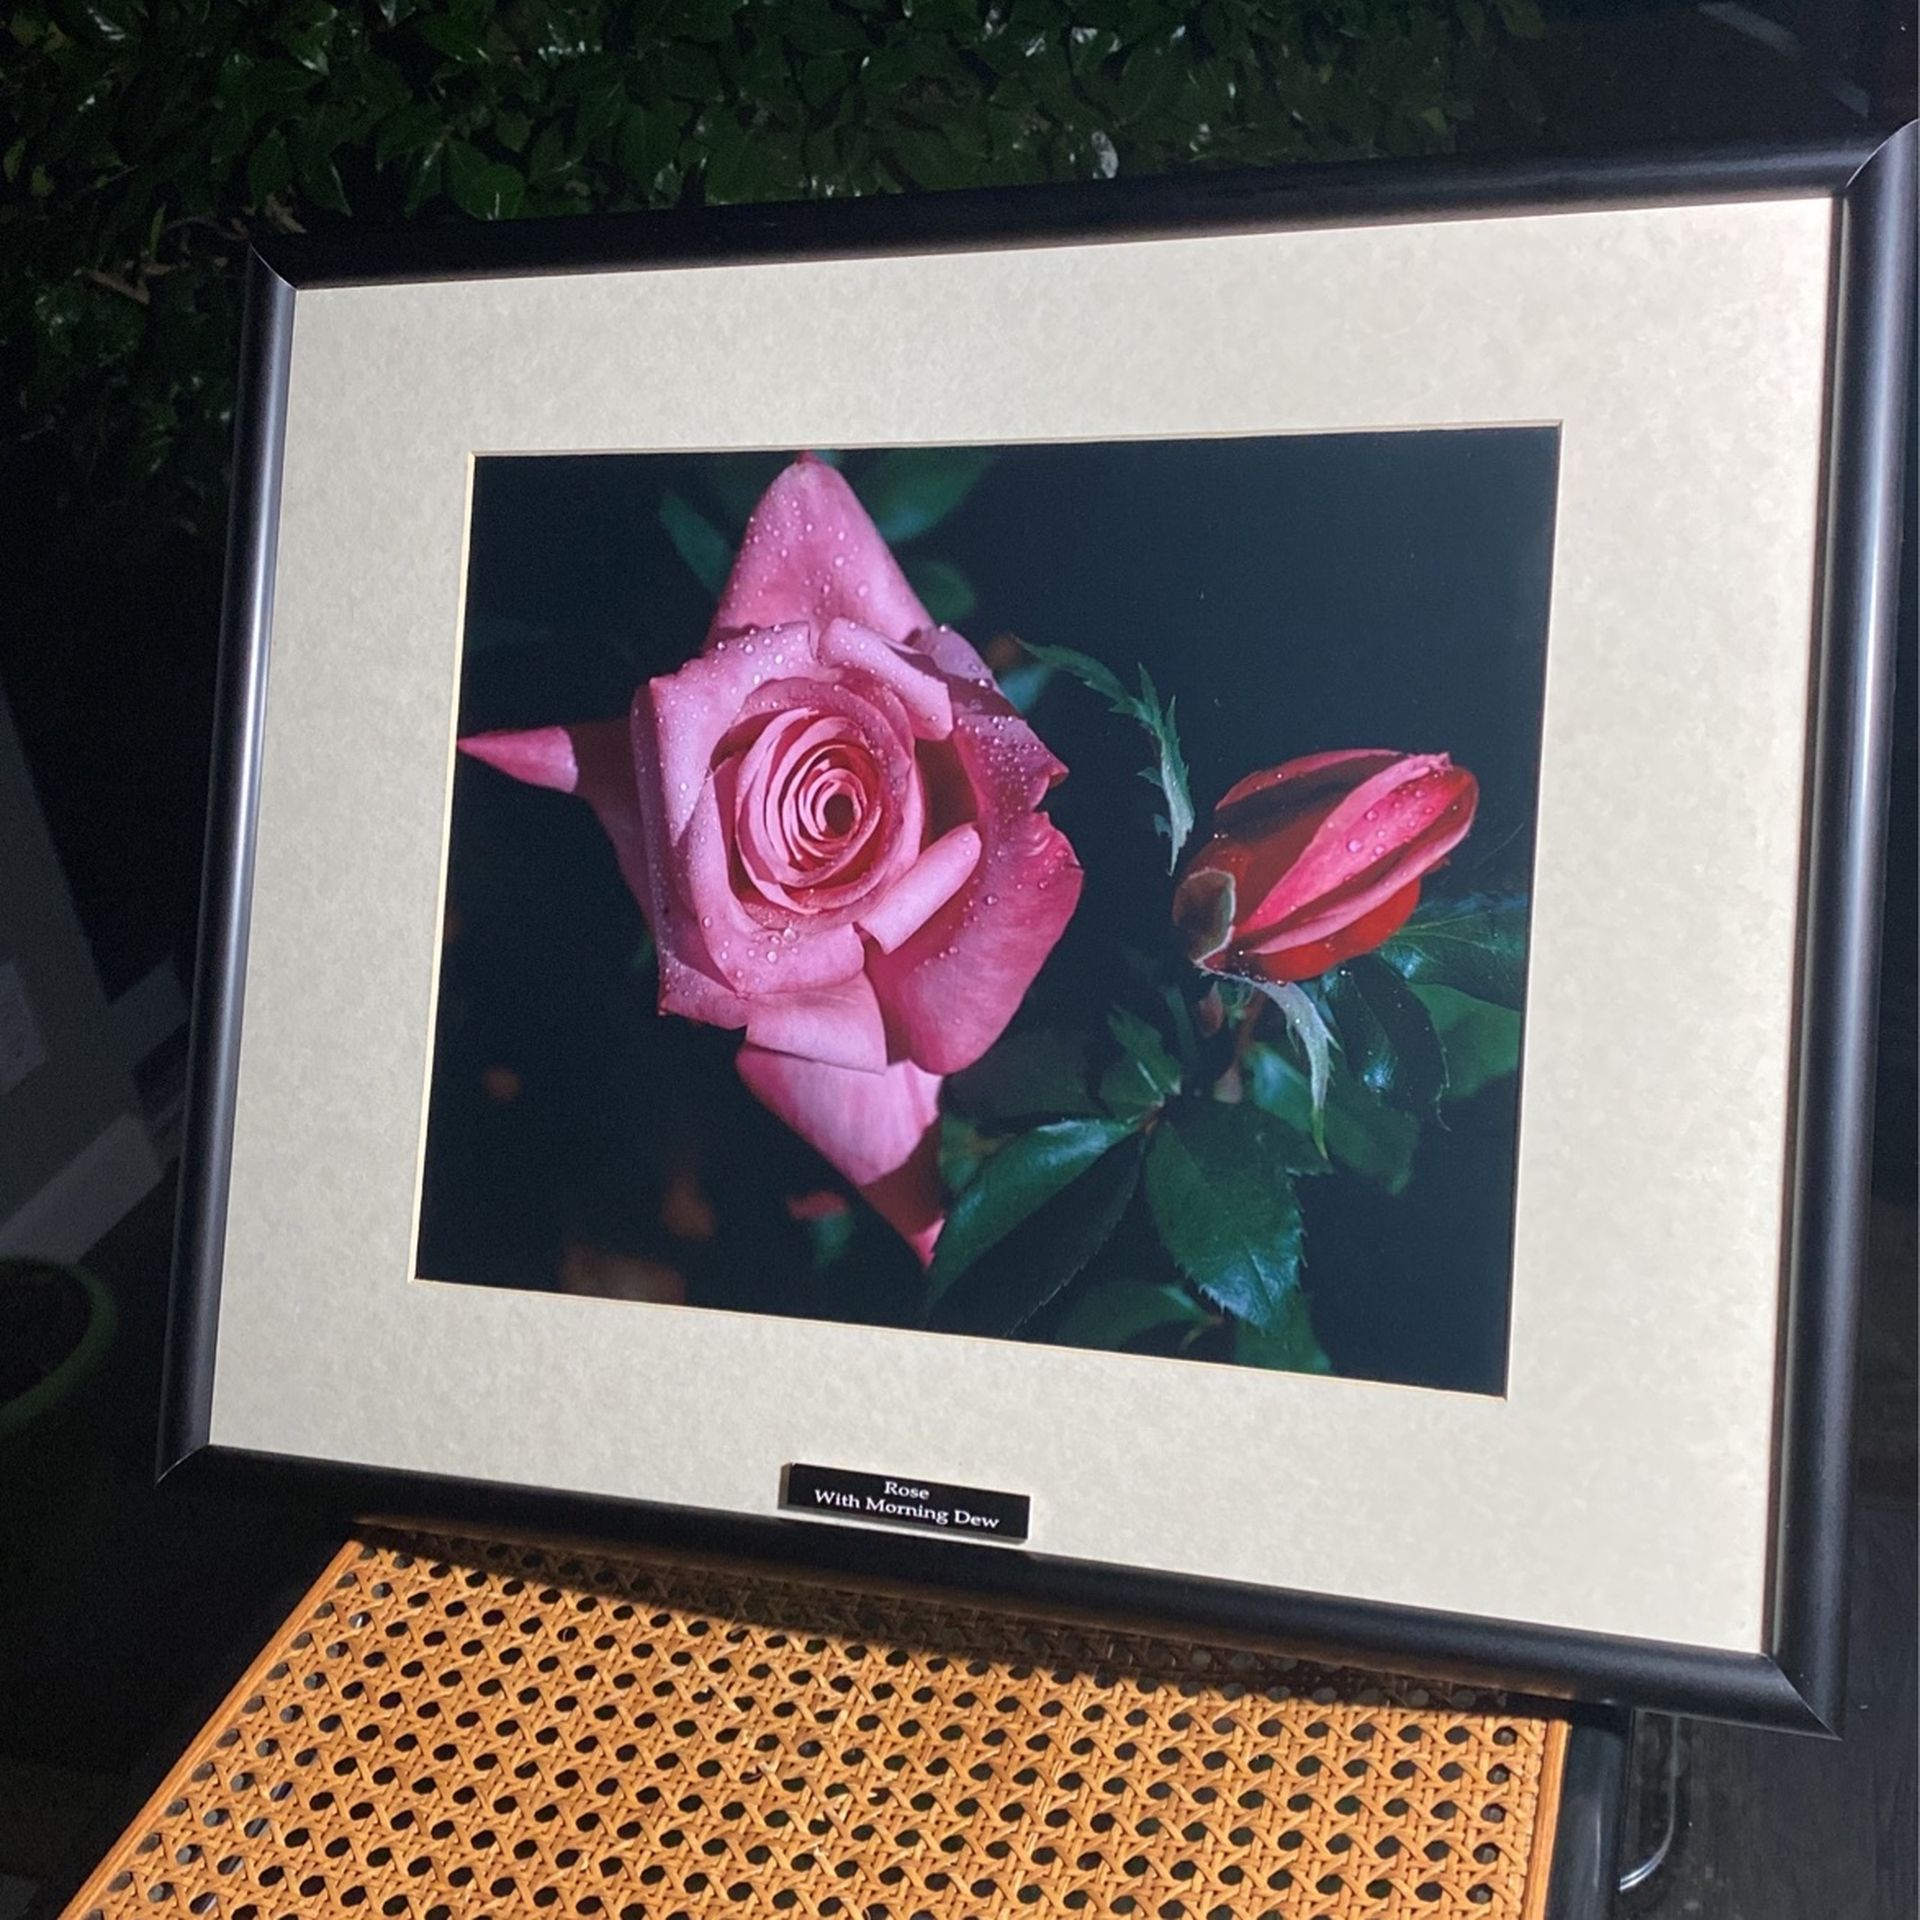 Rose photograph - “ The Morning Dew” (20” X 16”)